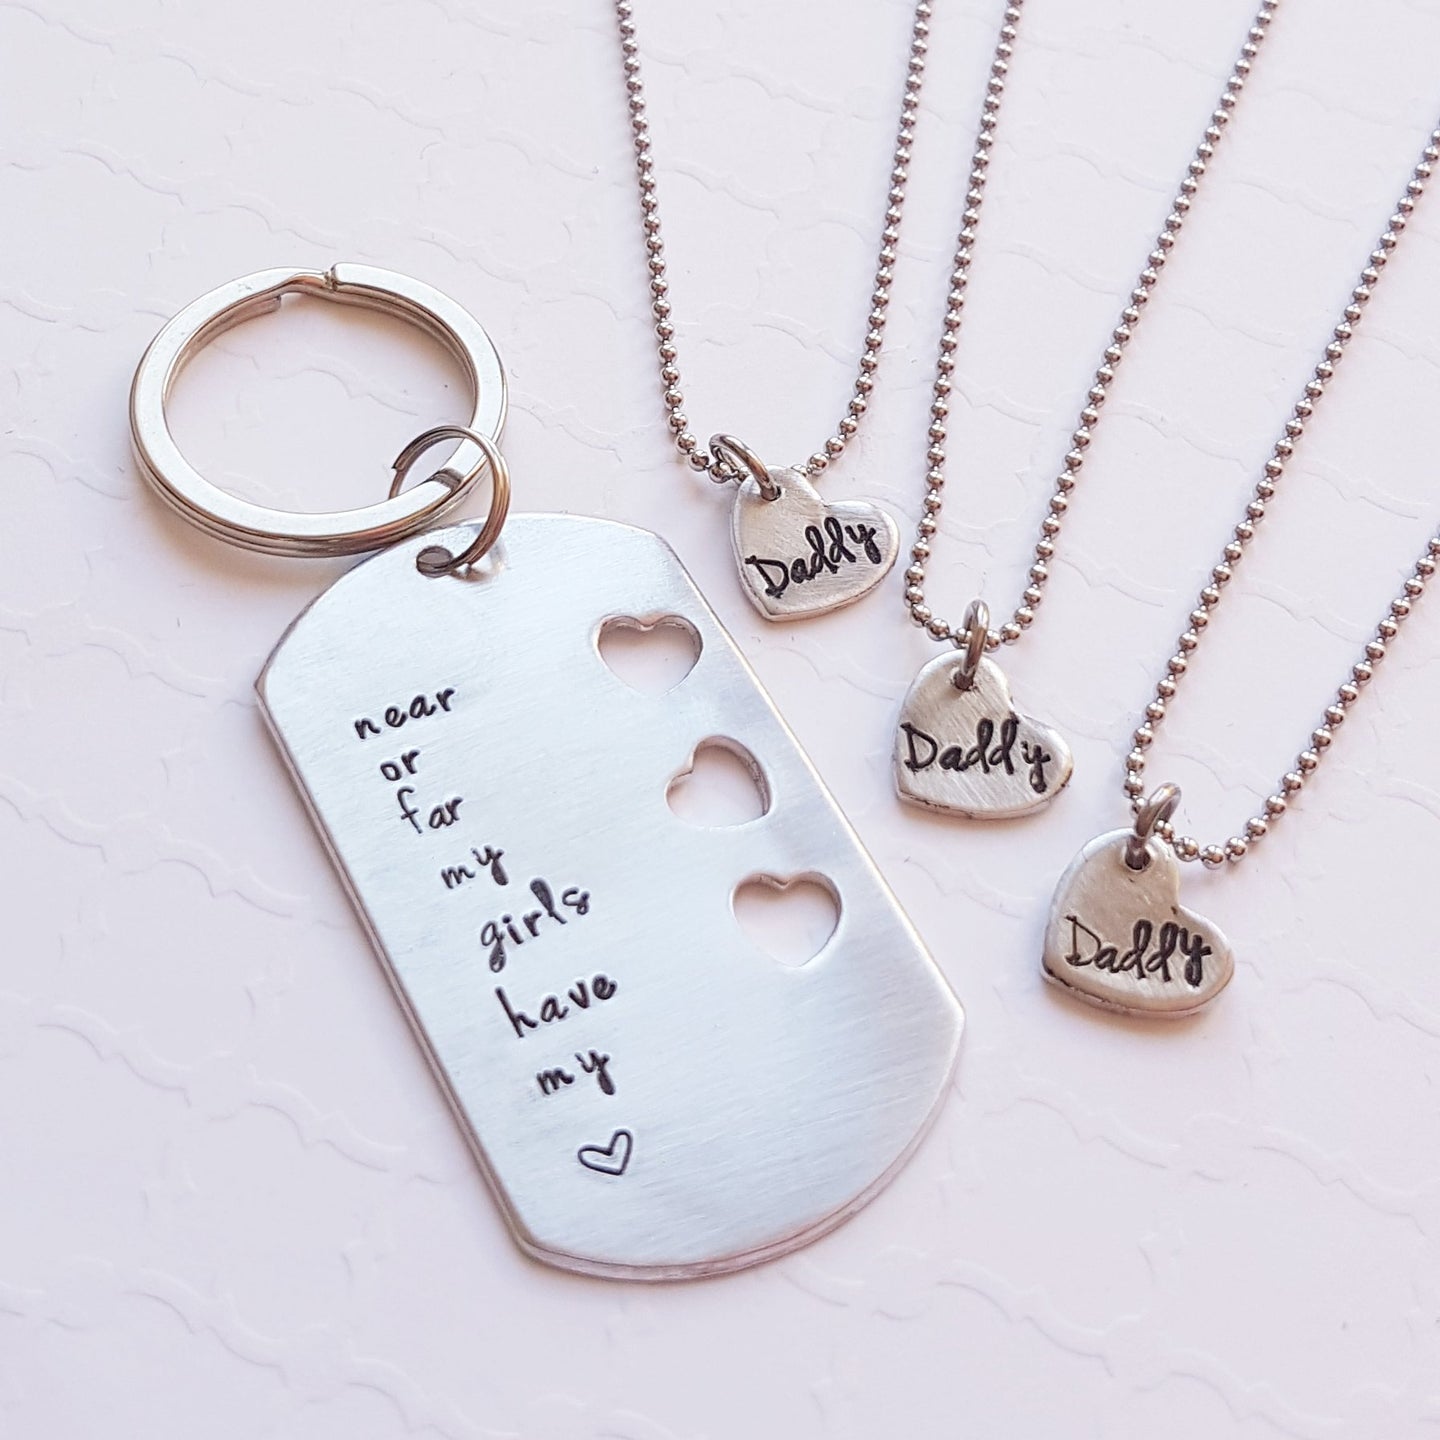 daddy-daughter keychain and necklace set with cut-out hearts for three daughters